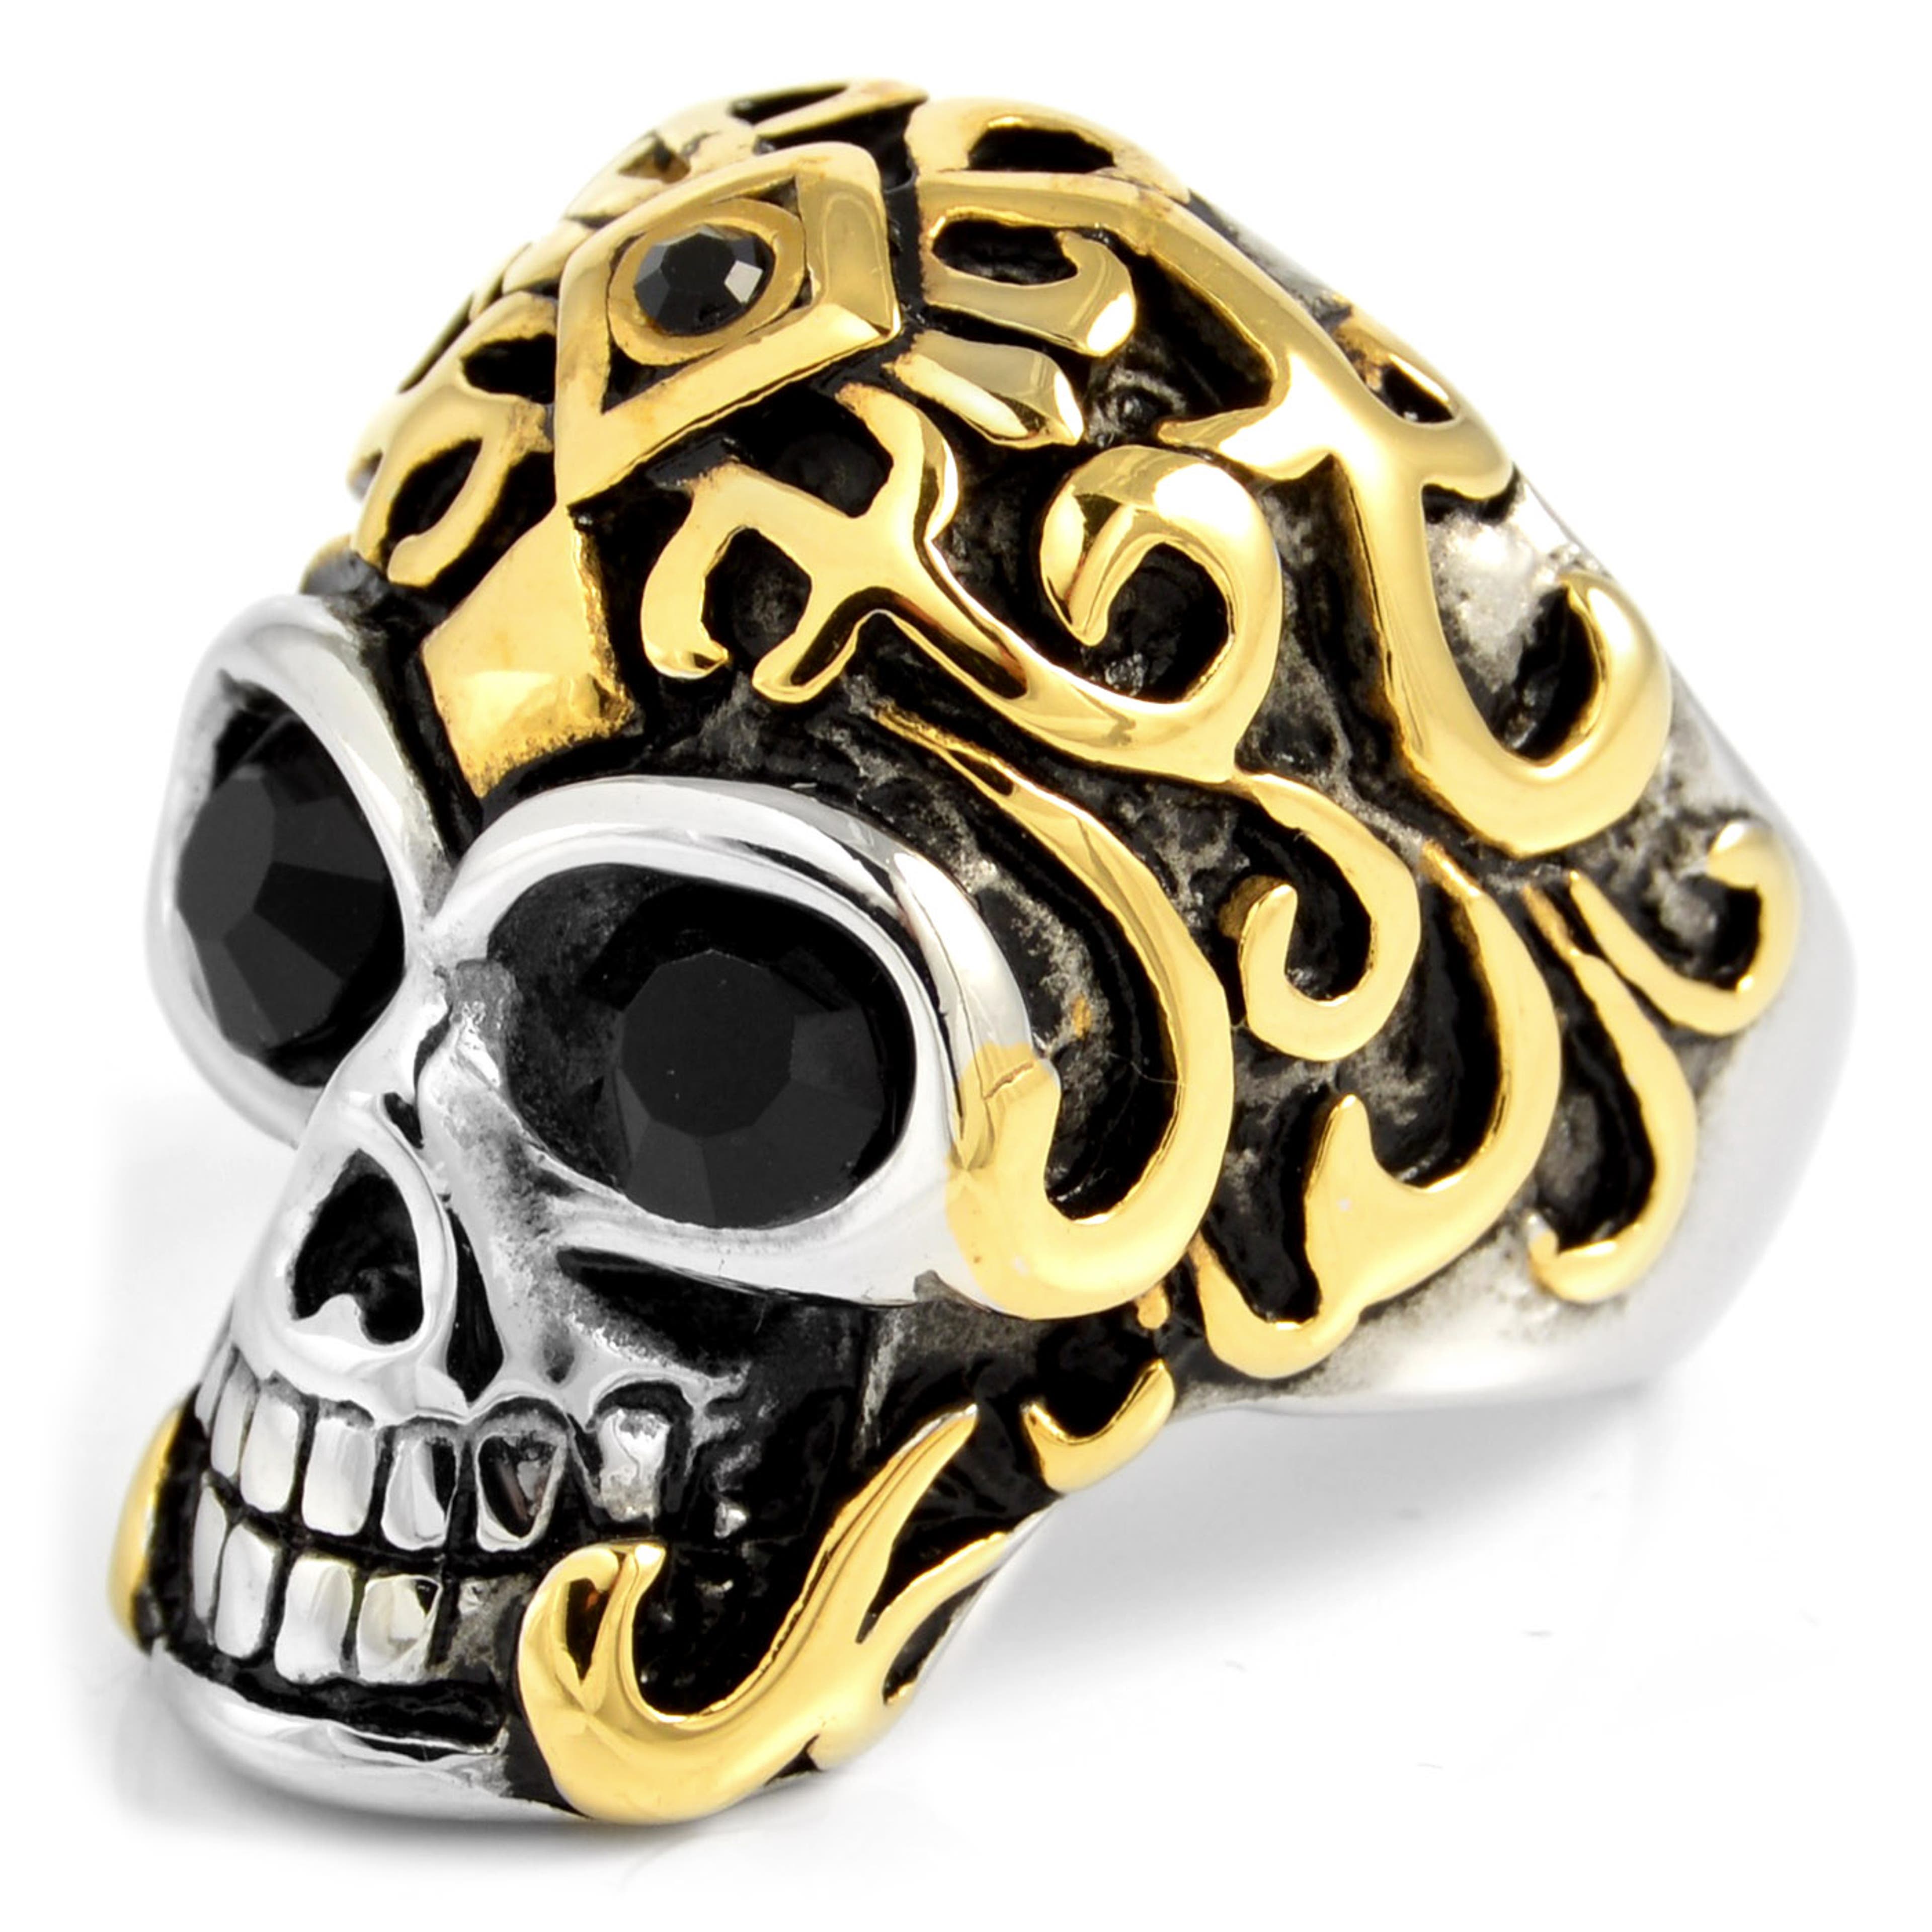 Gold-Tone Crowned Skull Steel Ring